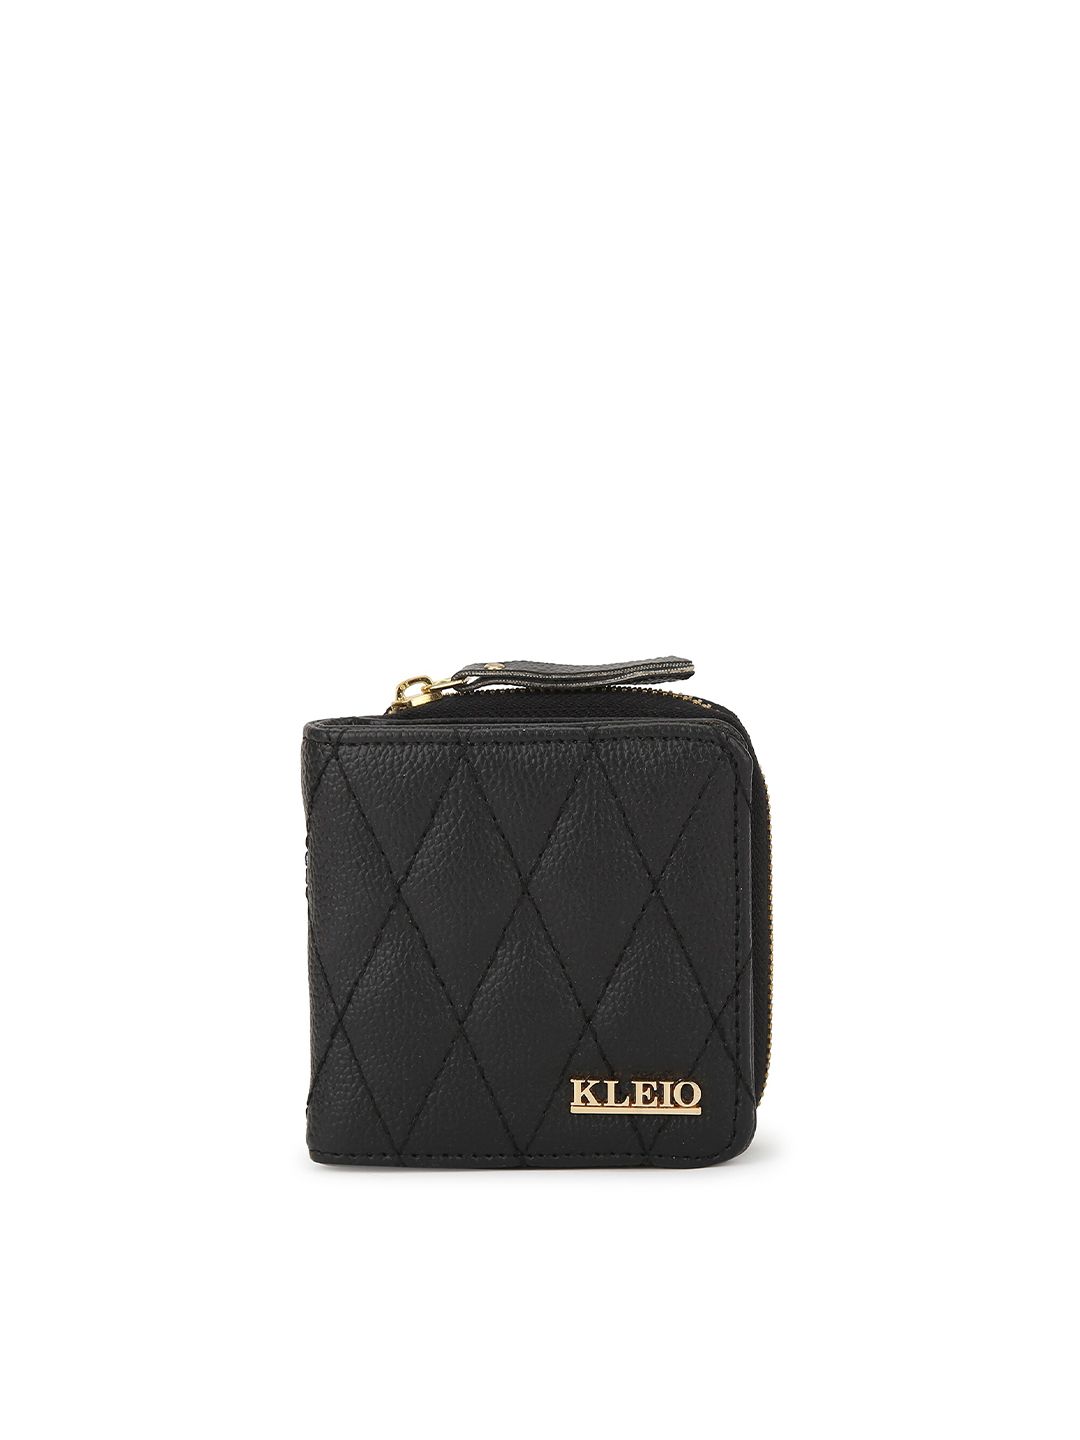 KLEIO Women Black Solid Quilted Synthetic Leather Zip Around Wallet Price in India